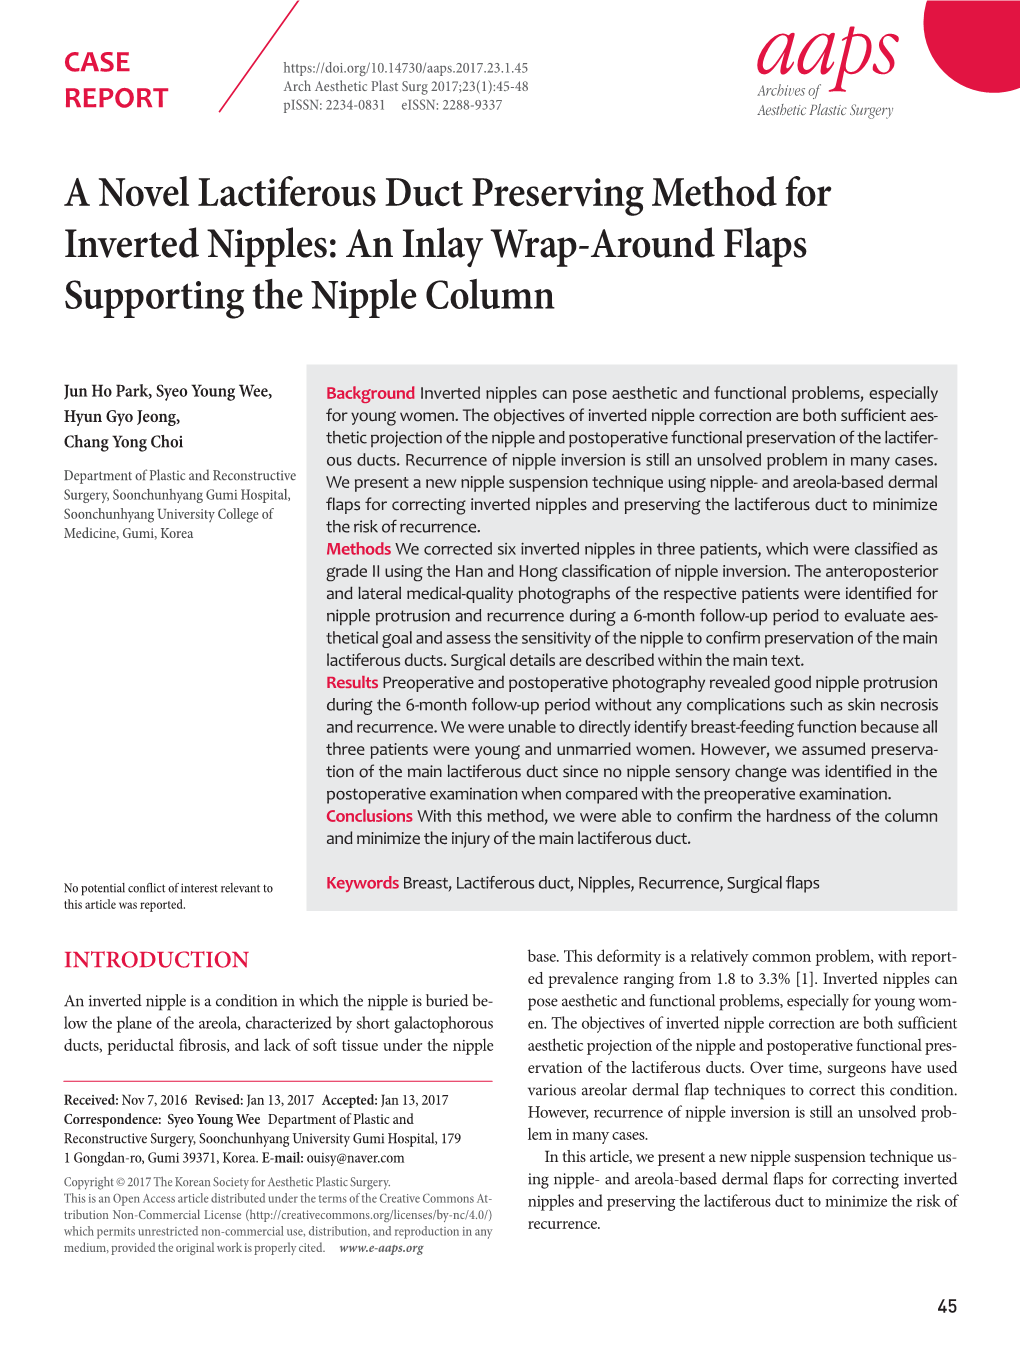 A Novel Lactiferous Duct Preserving Method for Inverted Nipples: an Inlay Wrap-Around Flaps Supporting the Nipple Column